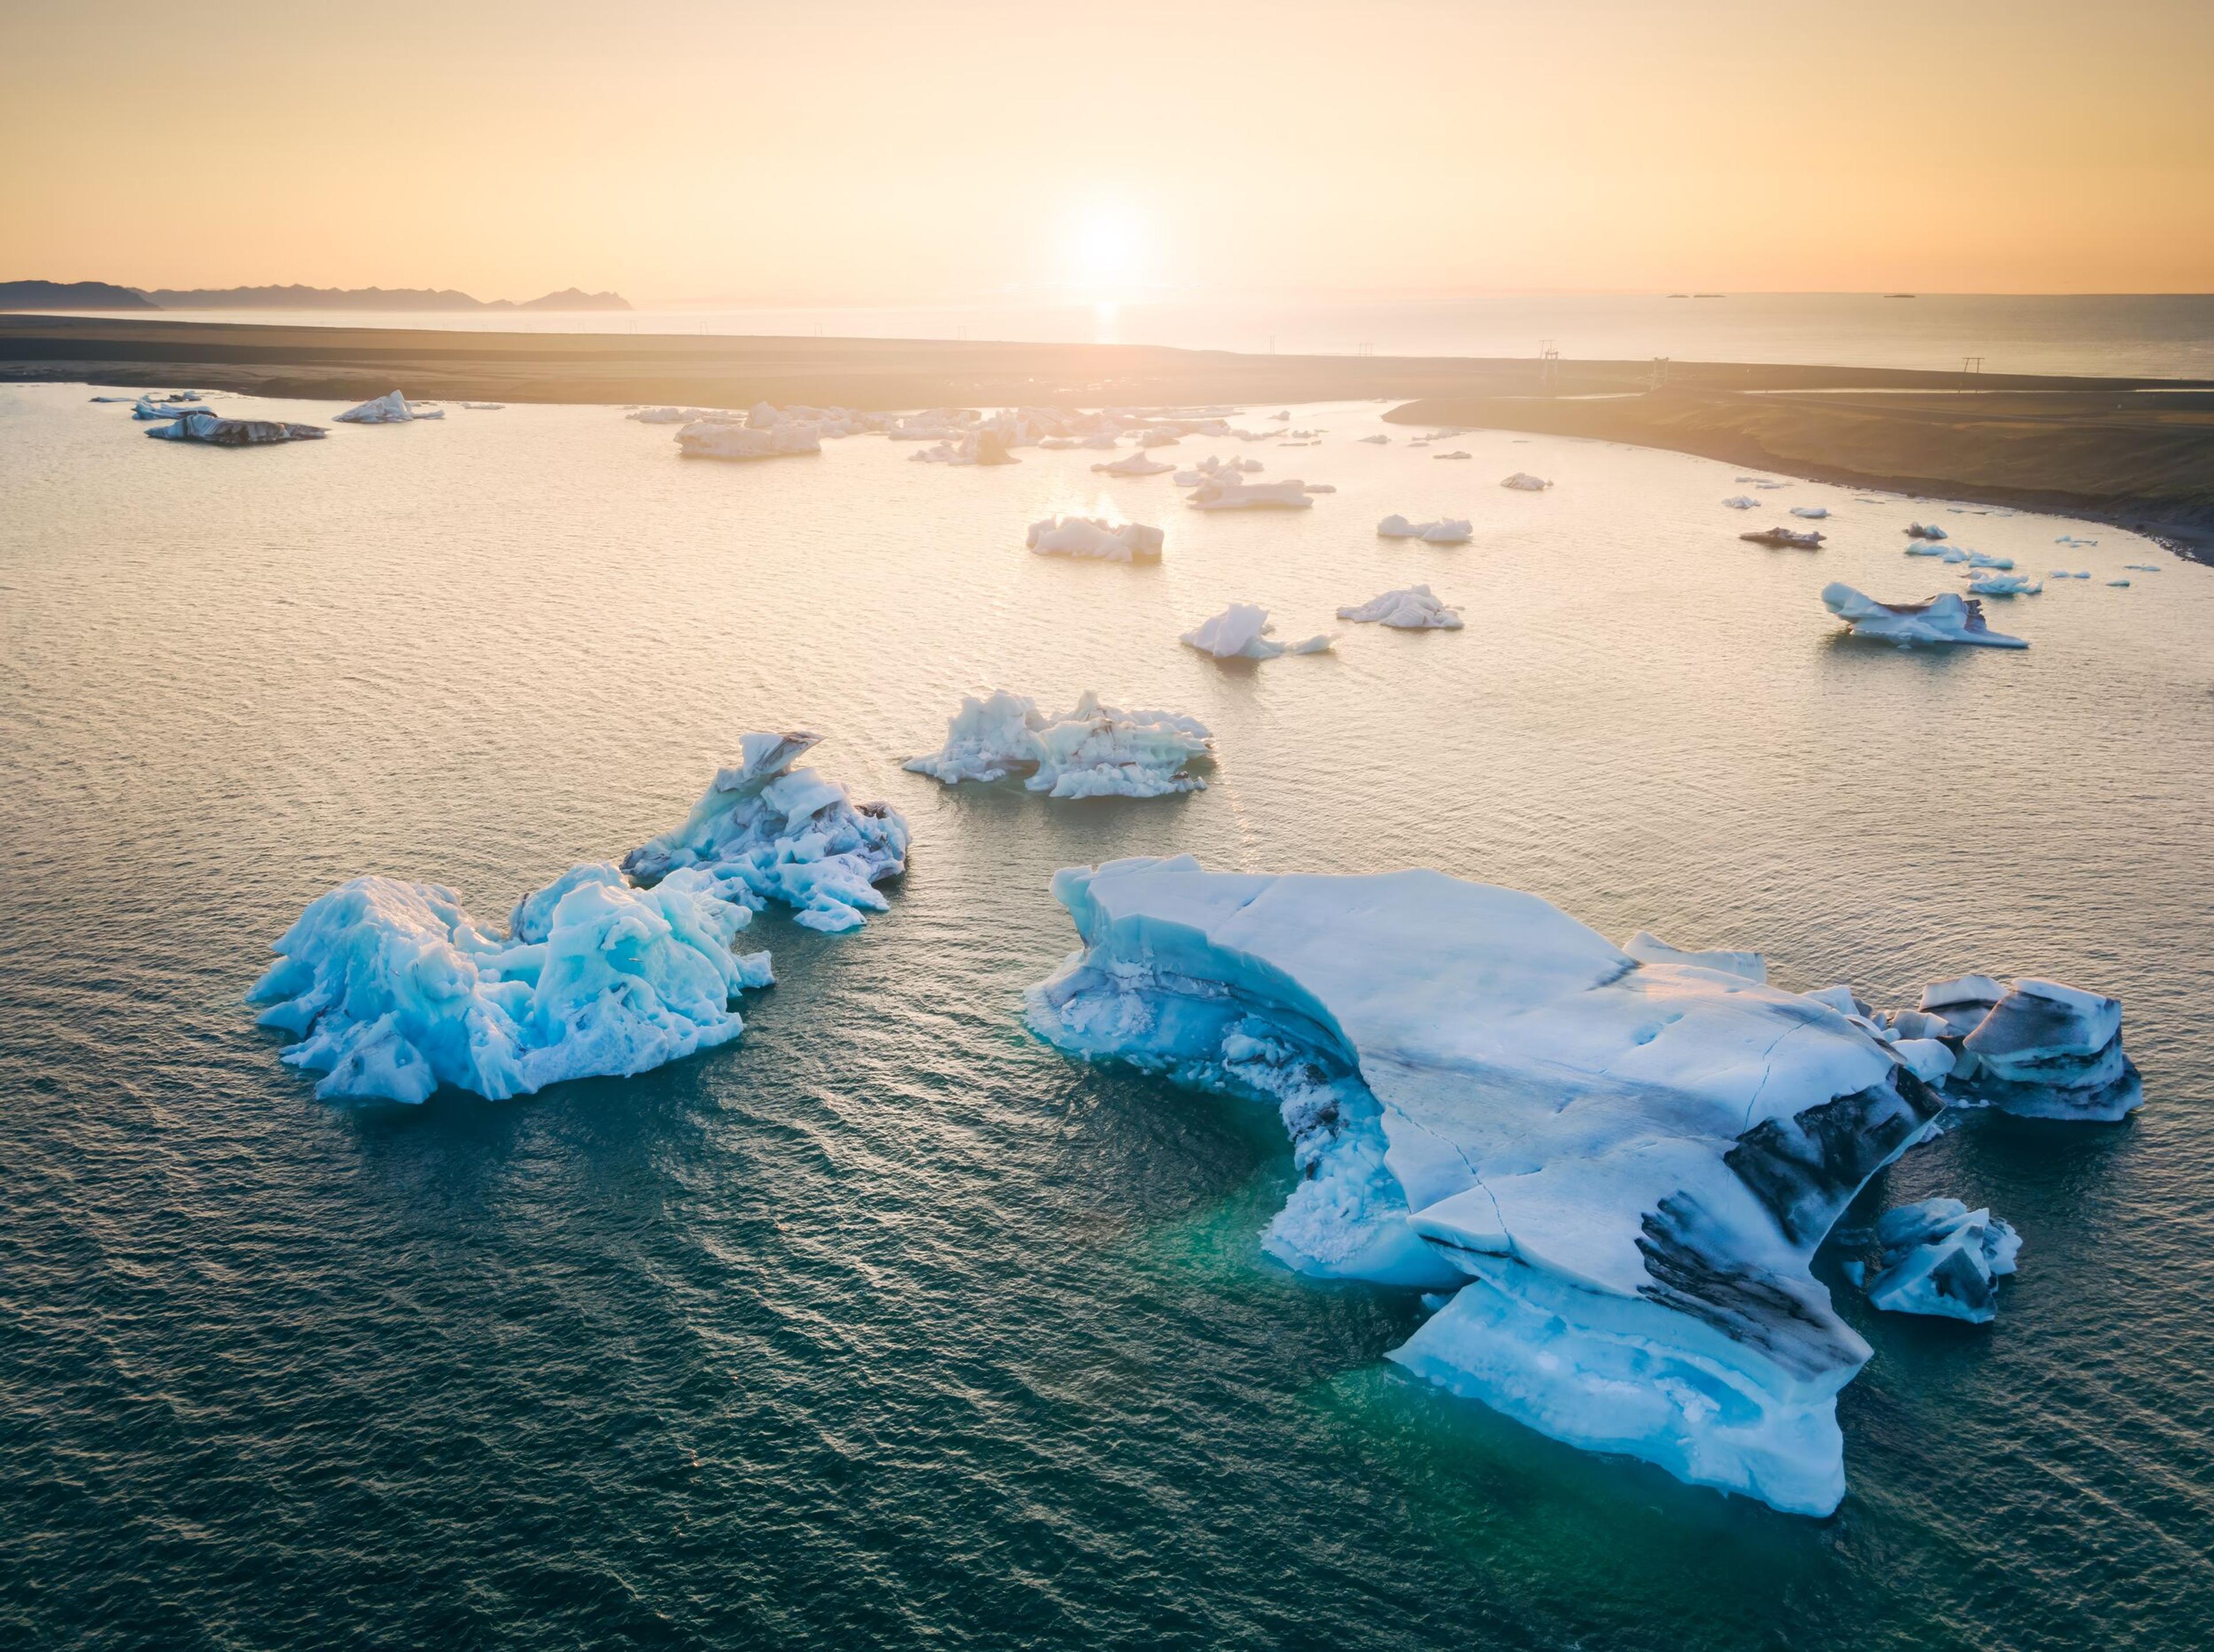 Aerial view of a glacial lagoon with floating icebergs glowing in the light of the setting sun.